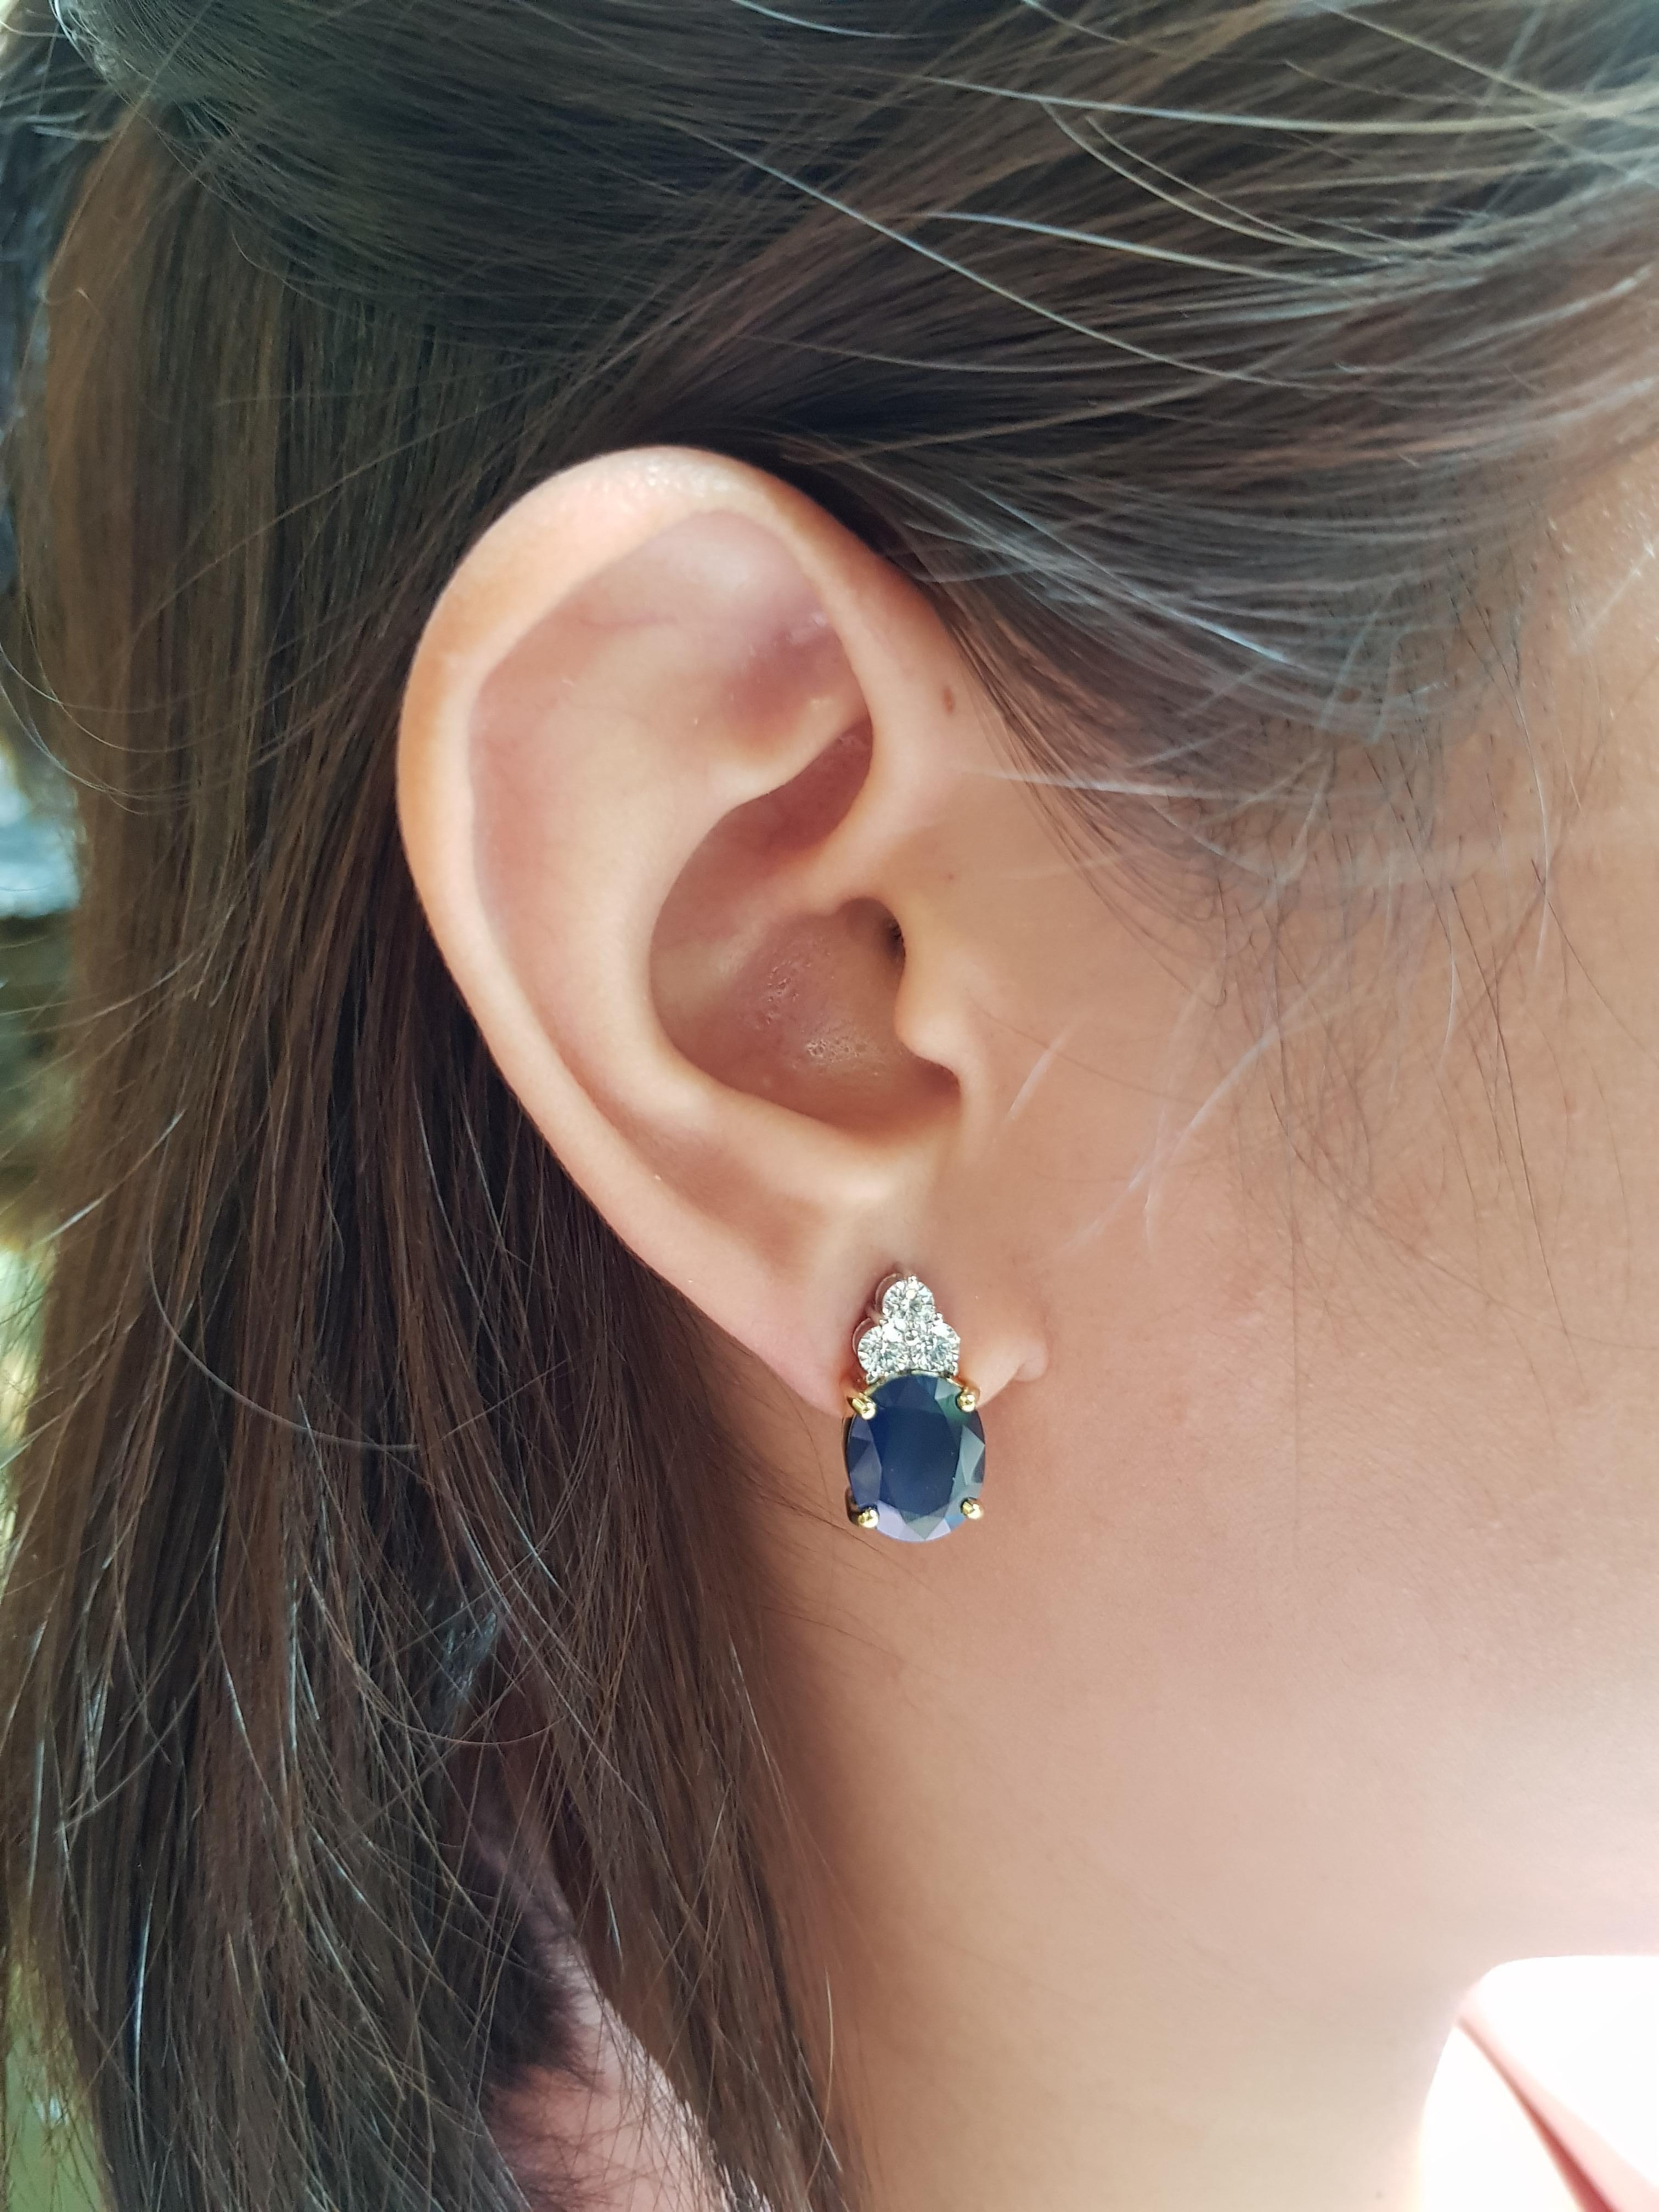 Blue Sapphire 3.52 carats with Diamond 0.79 carat Earrings set in 18 Karat Gold Settings

Width:  0.9 cm 
Length: 1.8 cm
Total Weight: 8.87 grams

